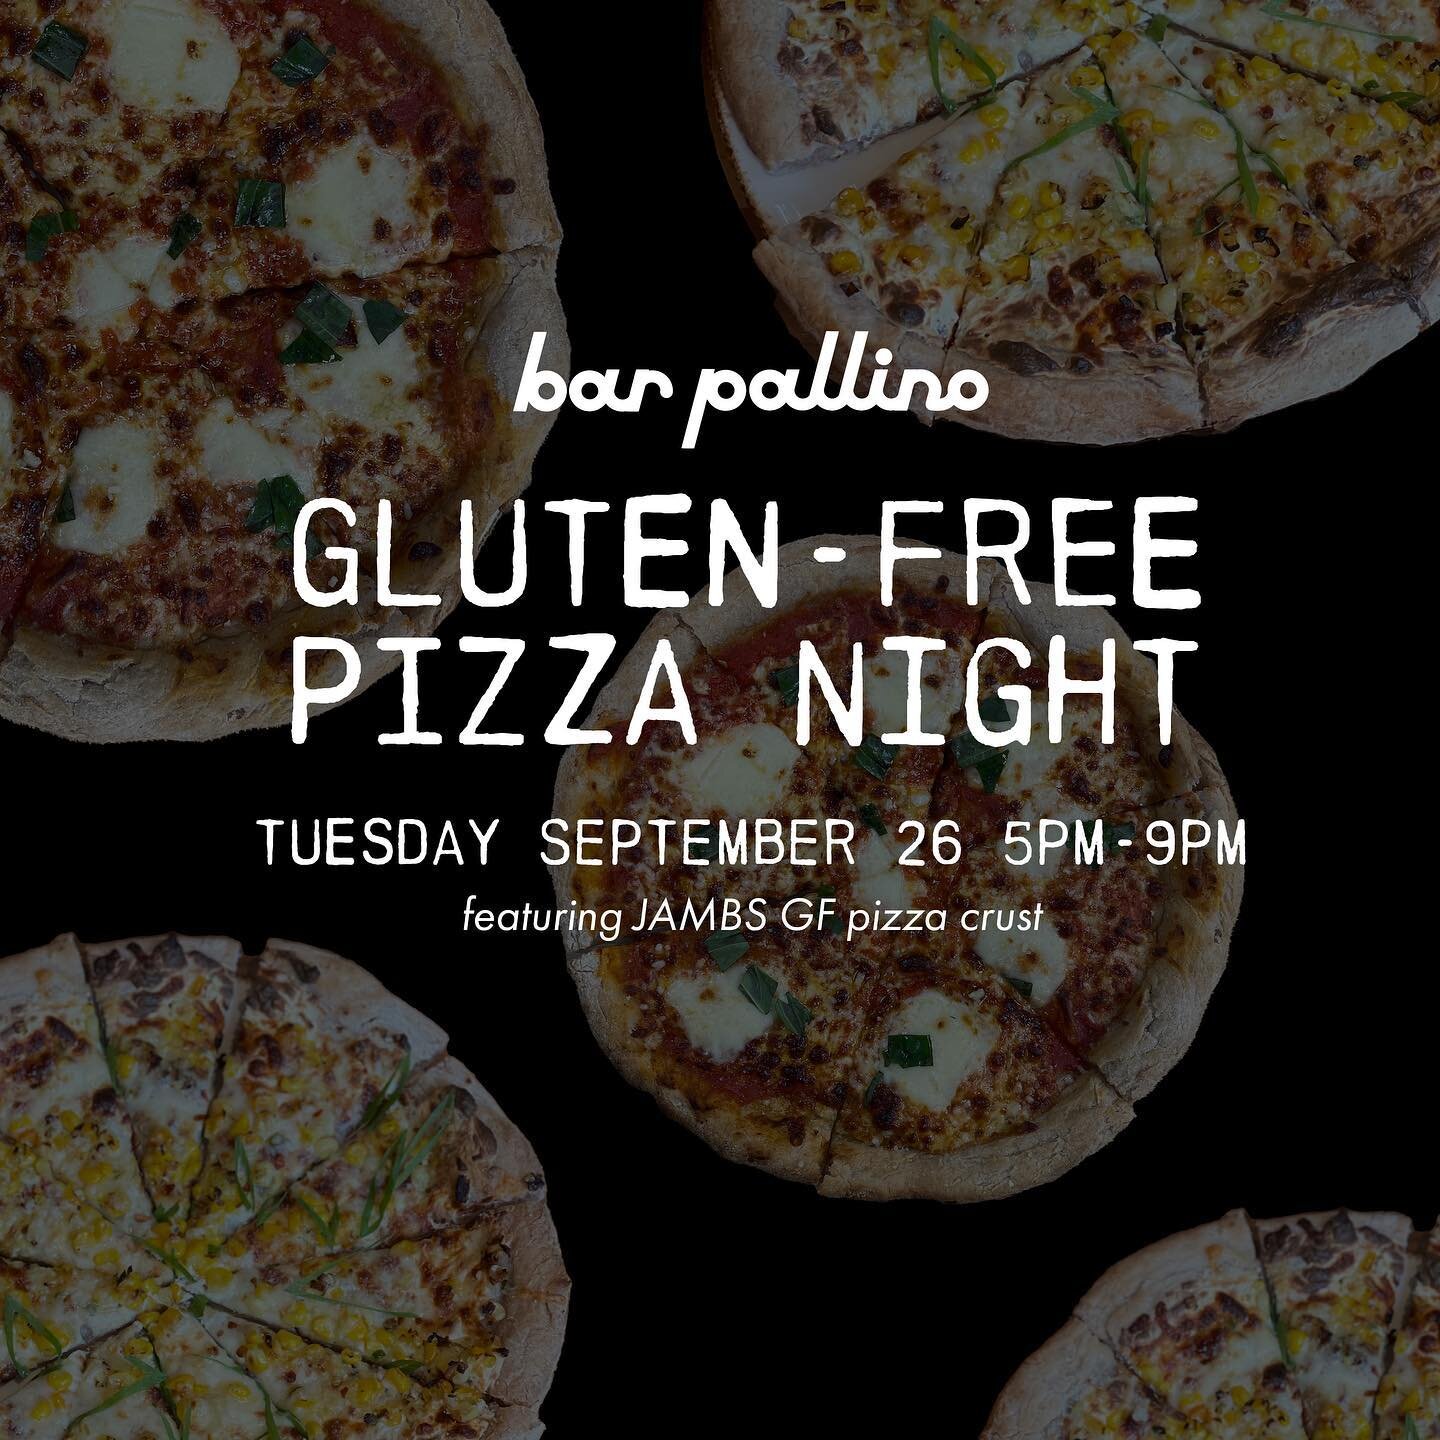 IT&rsquo;S HAPPENING AGAIN 🍕🍕🍕 our next gluten-free pizza night will be TUESDAY SEPTEMBER 26 ‼️ there&rsquo;ll be good pizza, good wine &amp; good vibes so tag a friend and mark your calendars! (no reservations, pizza will be served in bar pallino